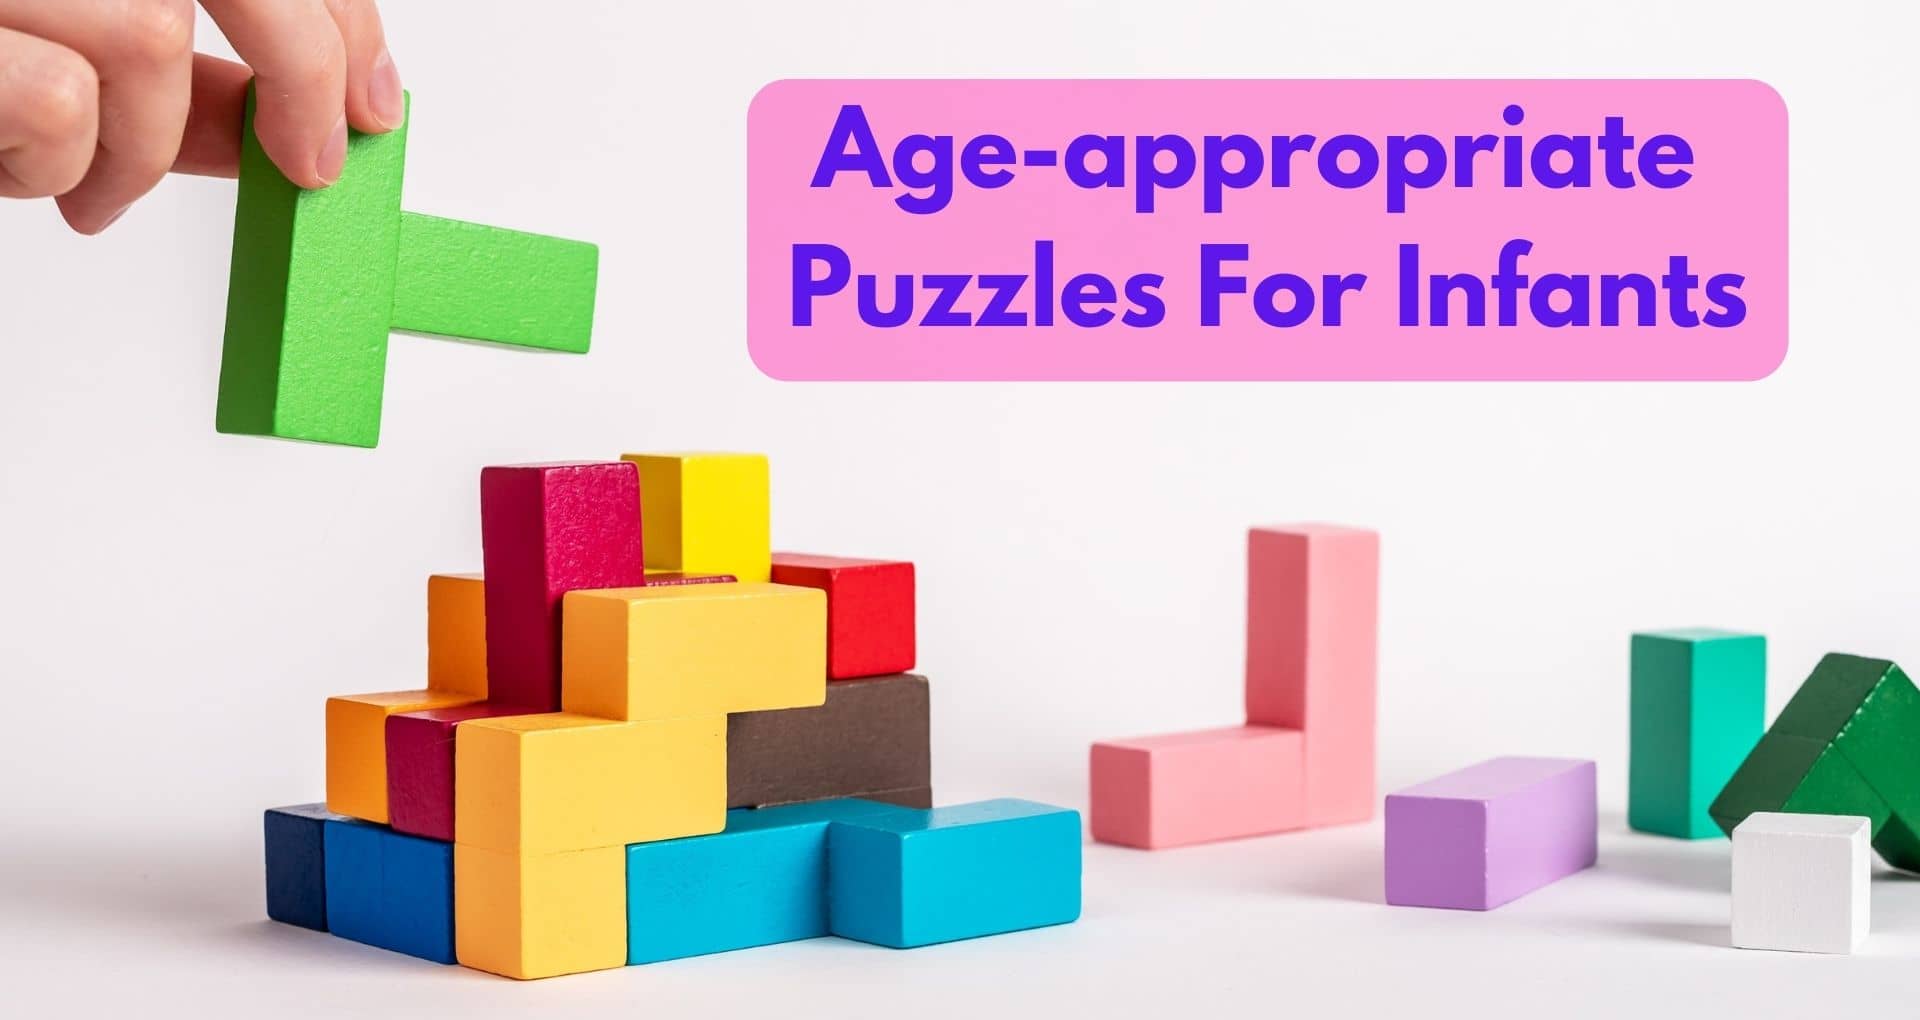 Can You Suggest Some Age-appropriate Puzzles For Infants?